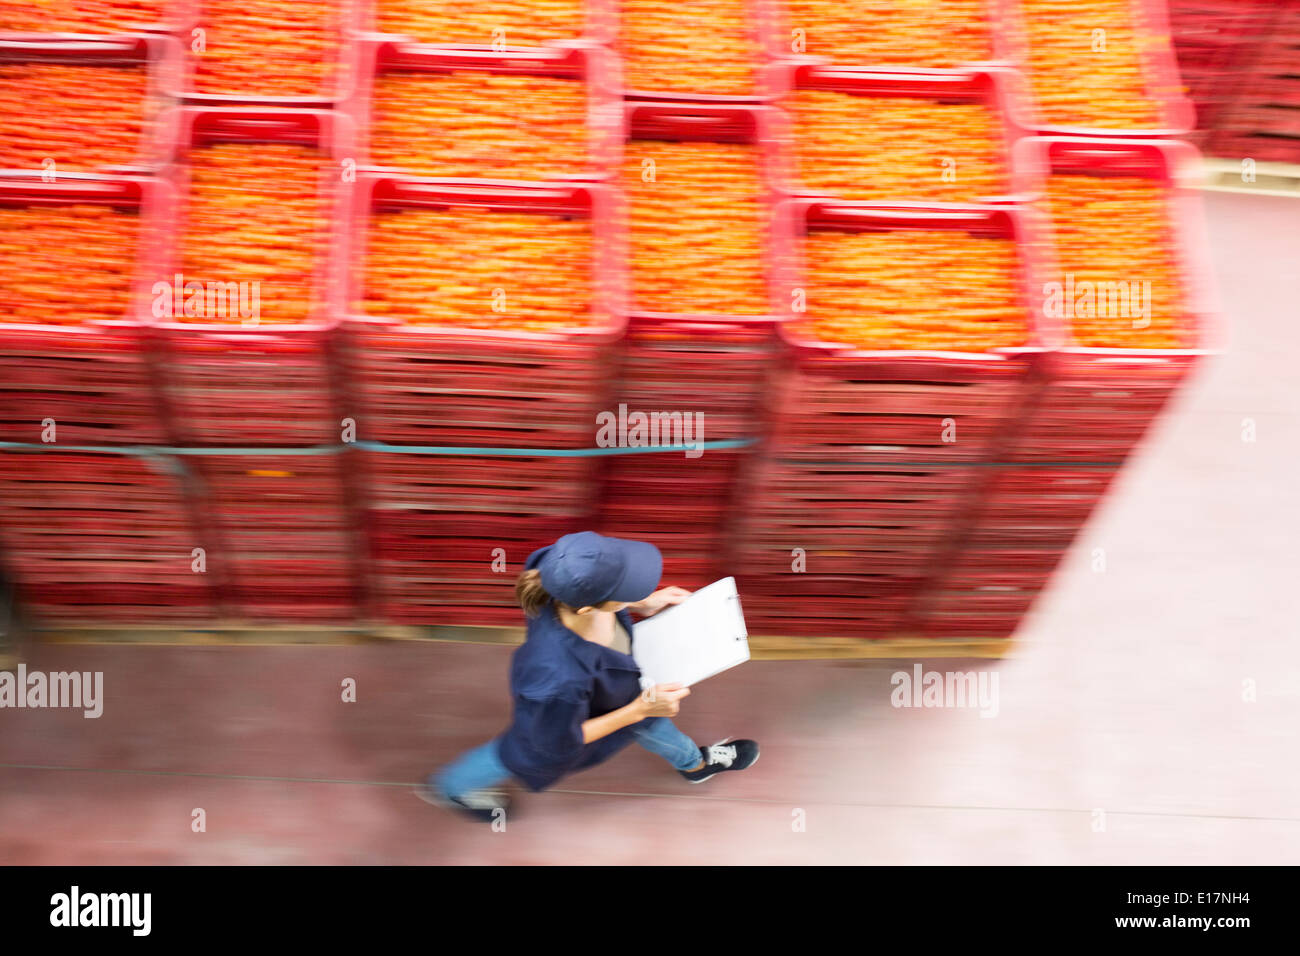 Worker with clipboard walking past tomato crates in food processing plant Stock Photo